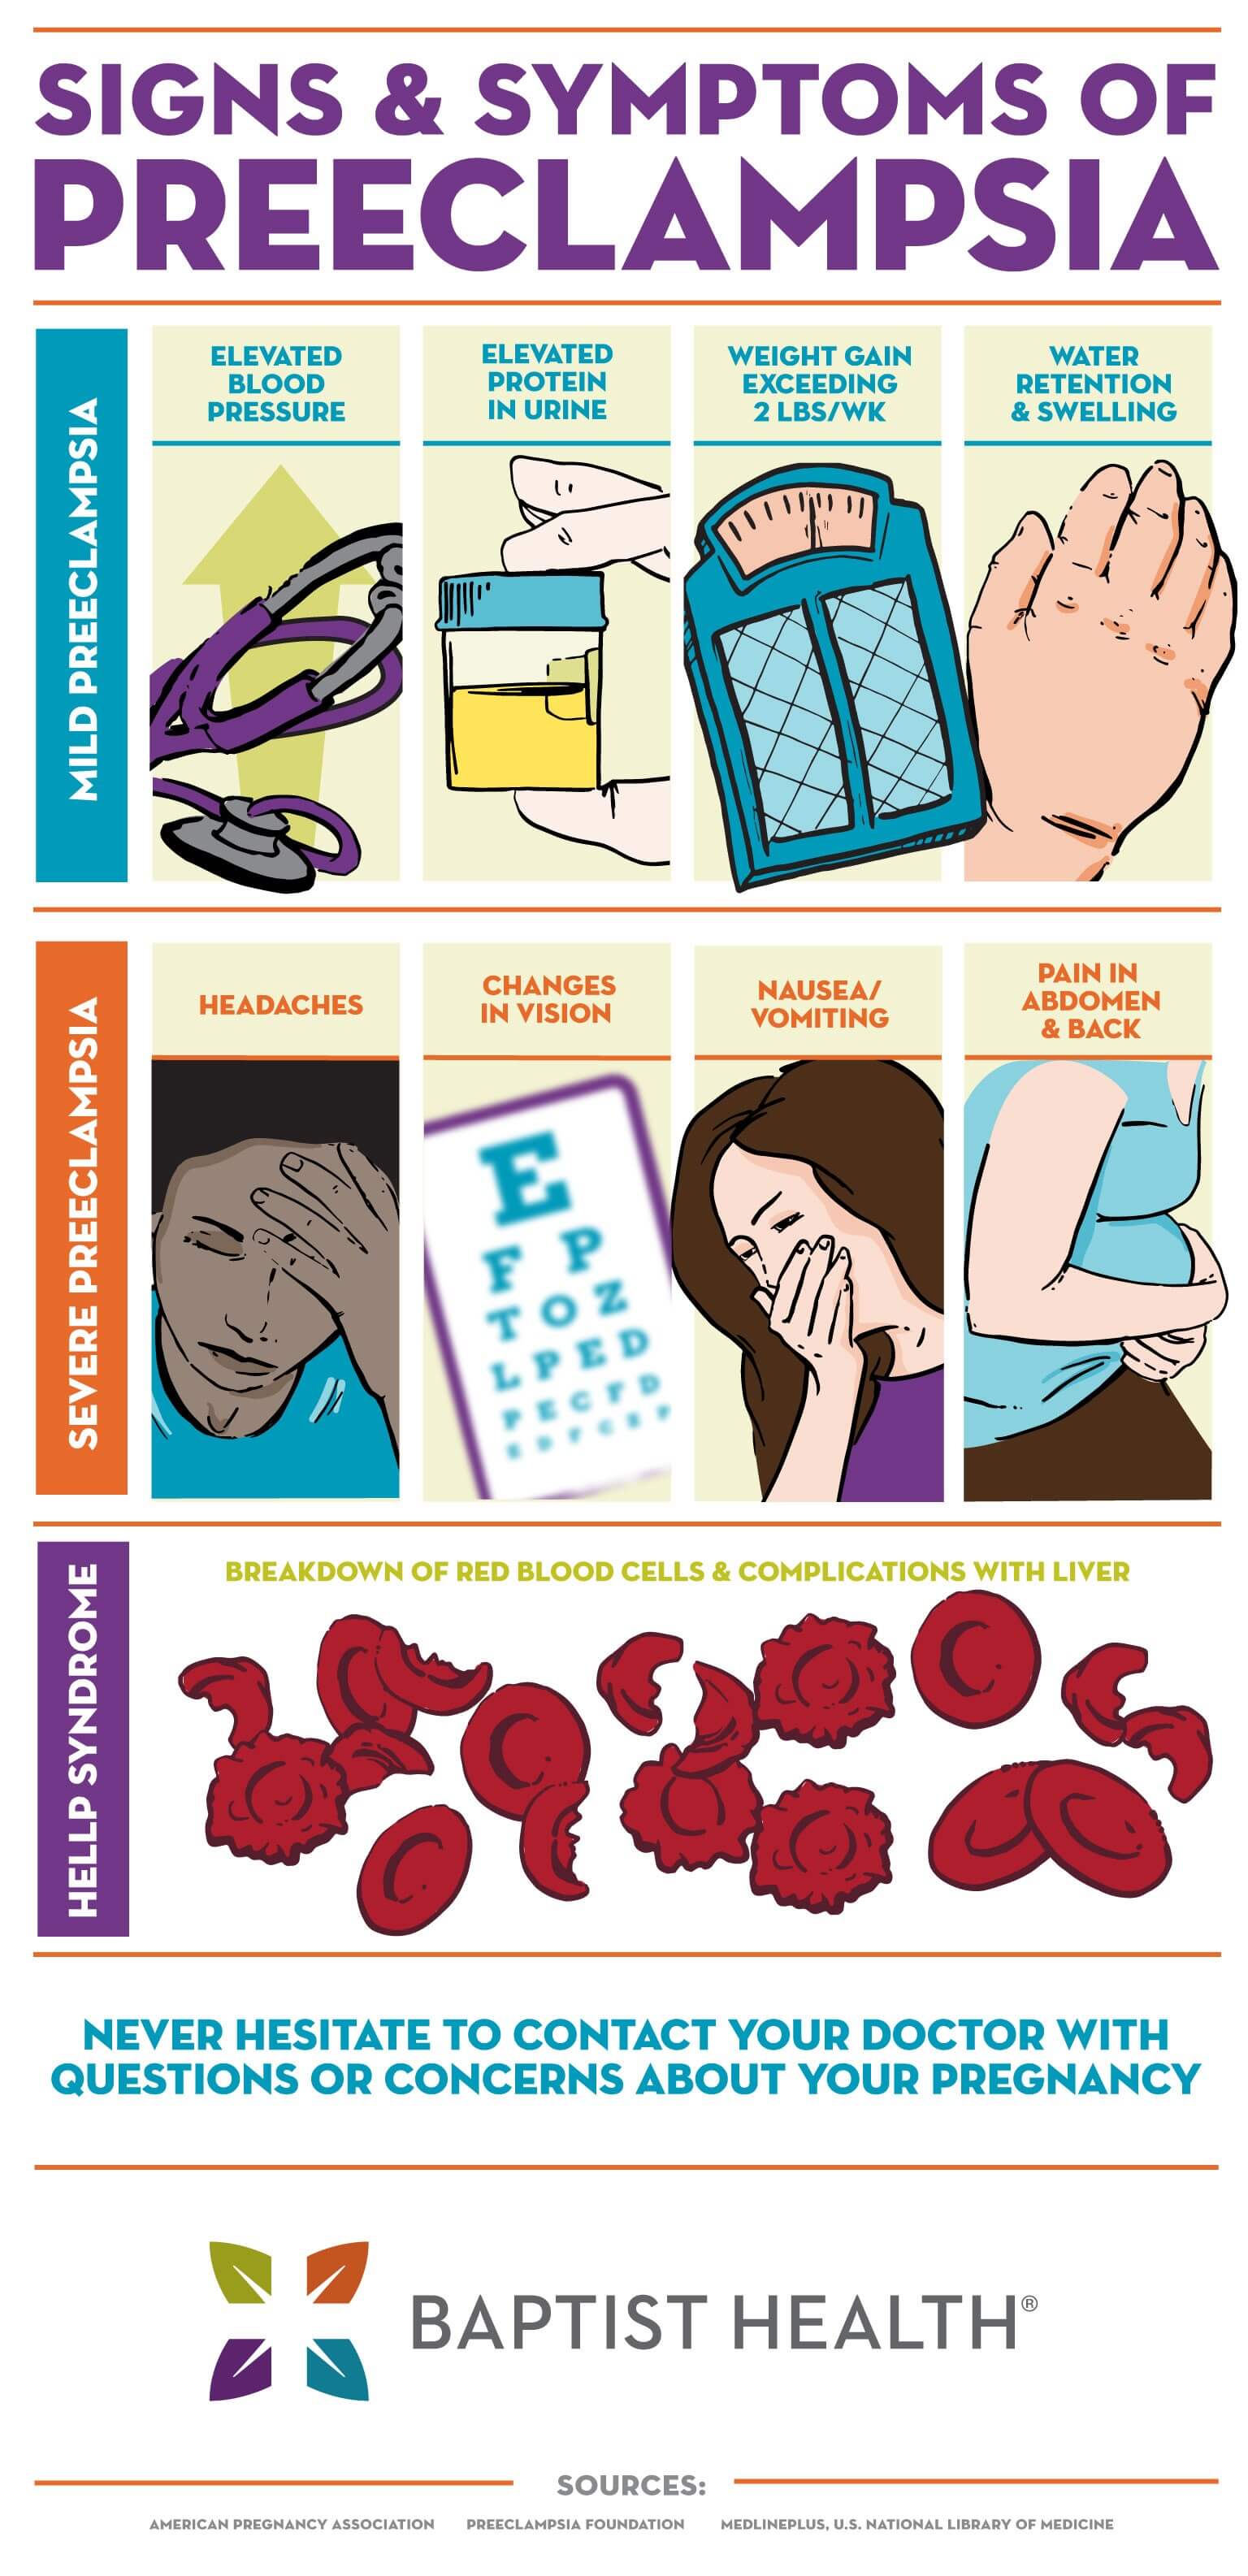 signs and symptoms of preeclampsia infographic